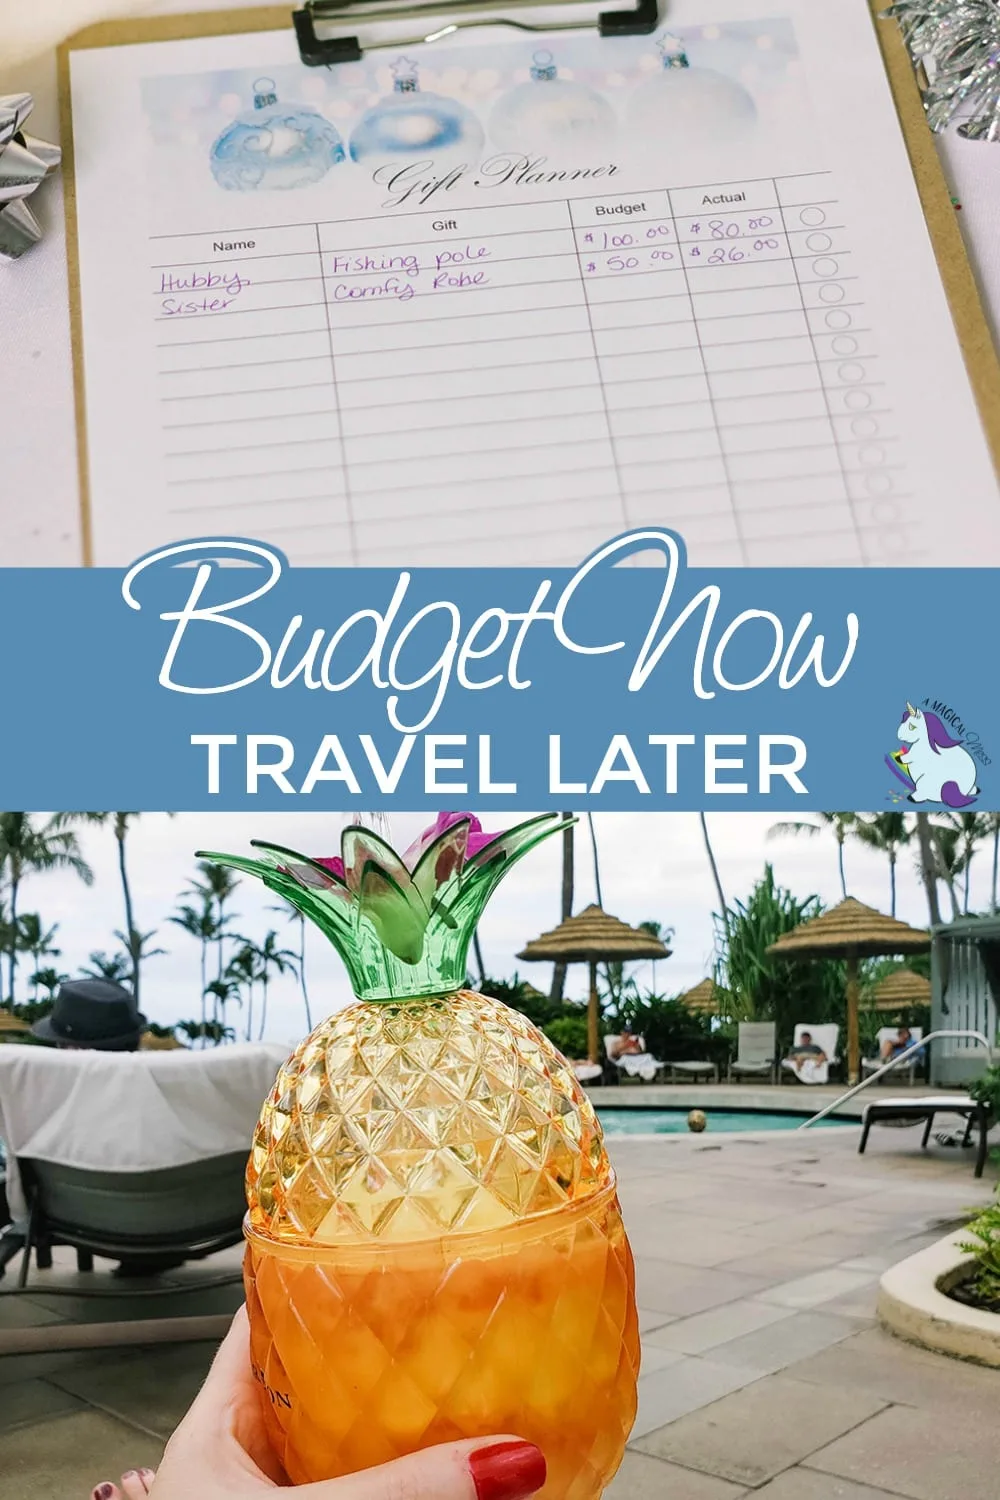 Budget sheet and pineapple drink